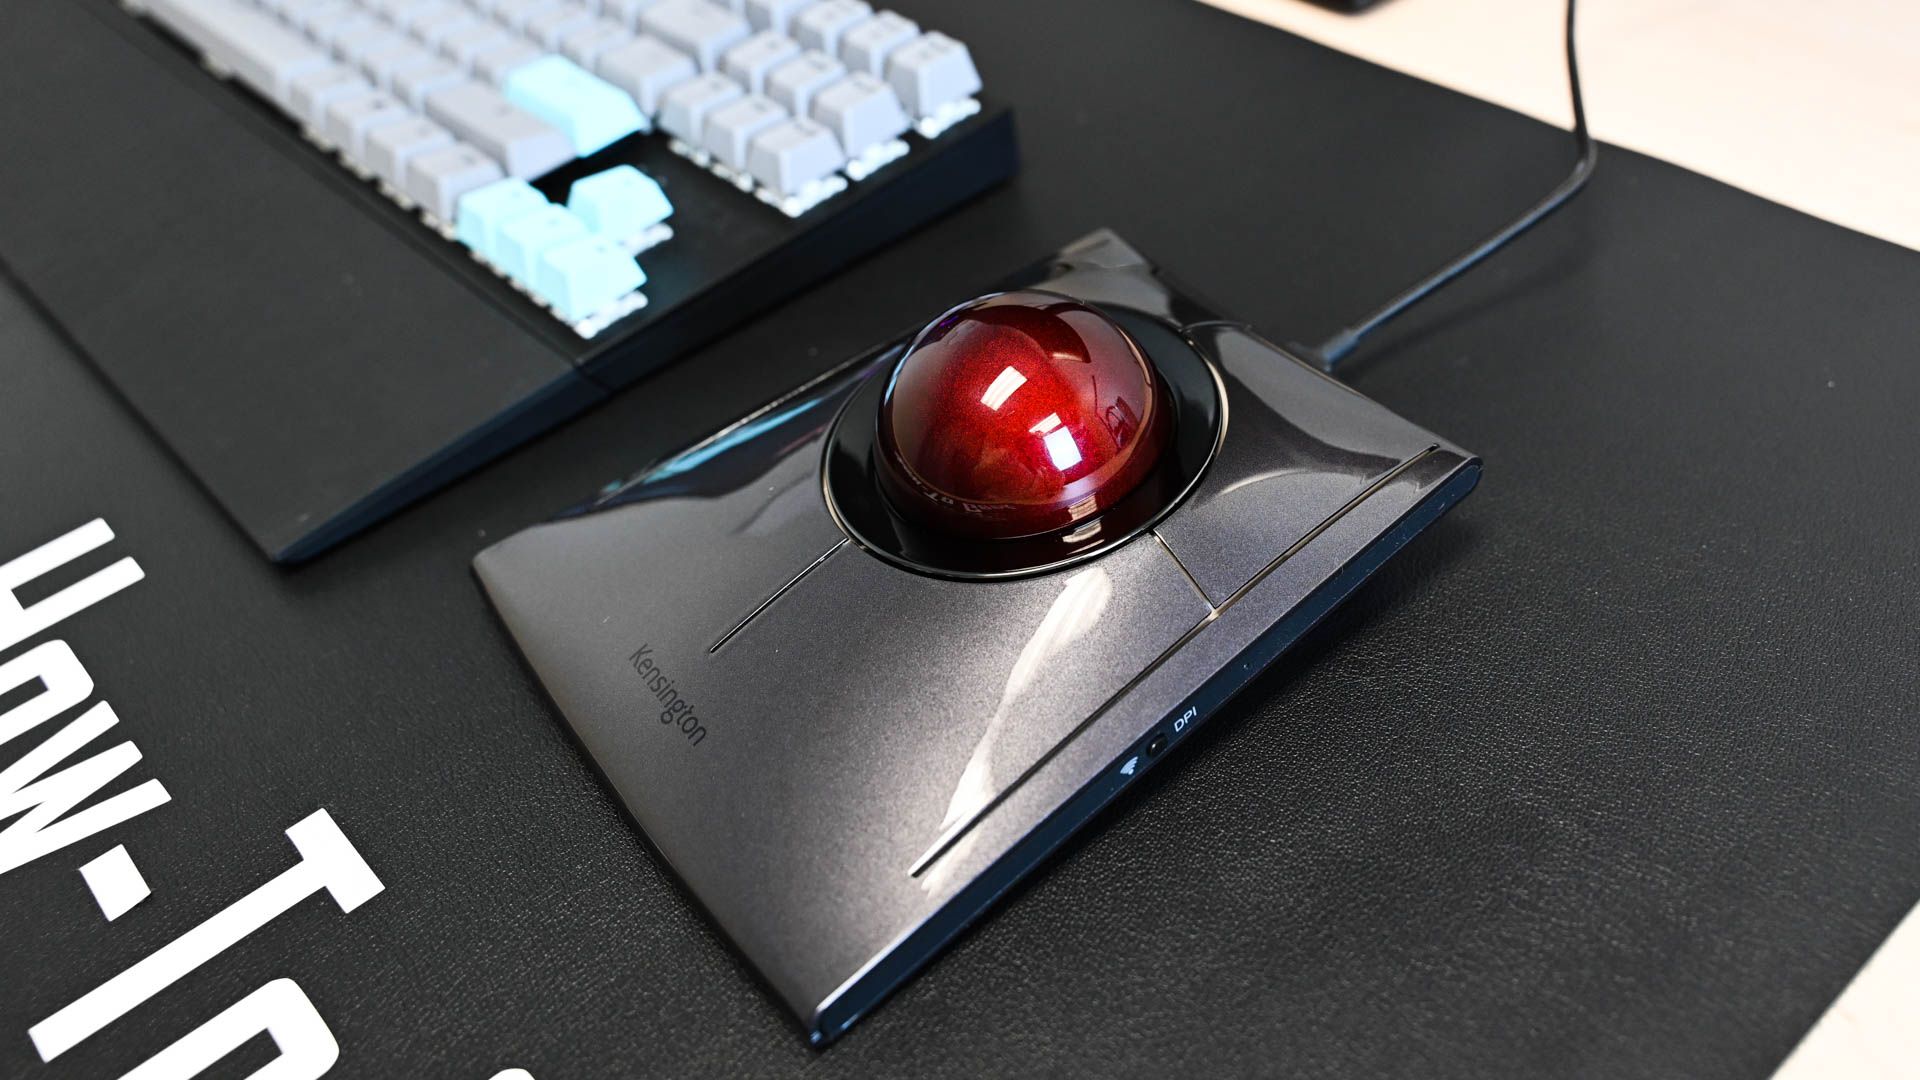 Kensington SlimBlade Pro Trackball using a wired connection